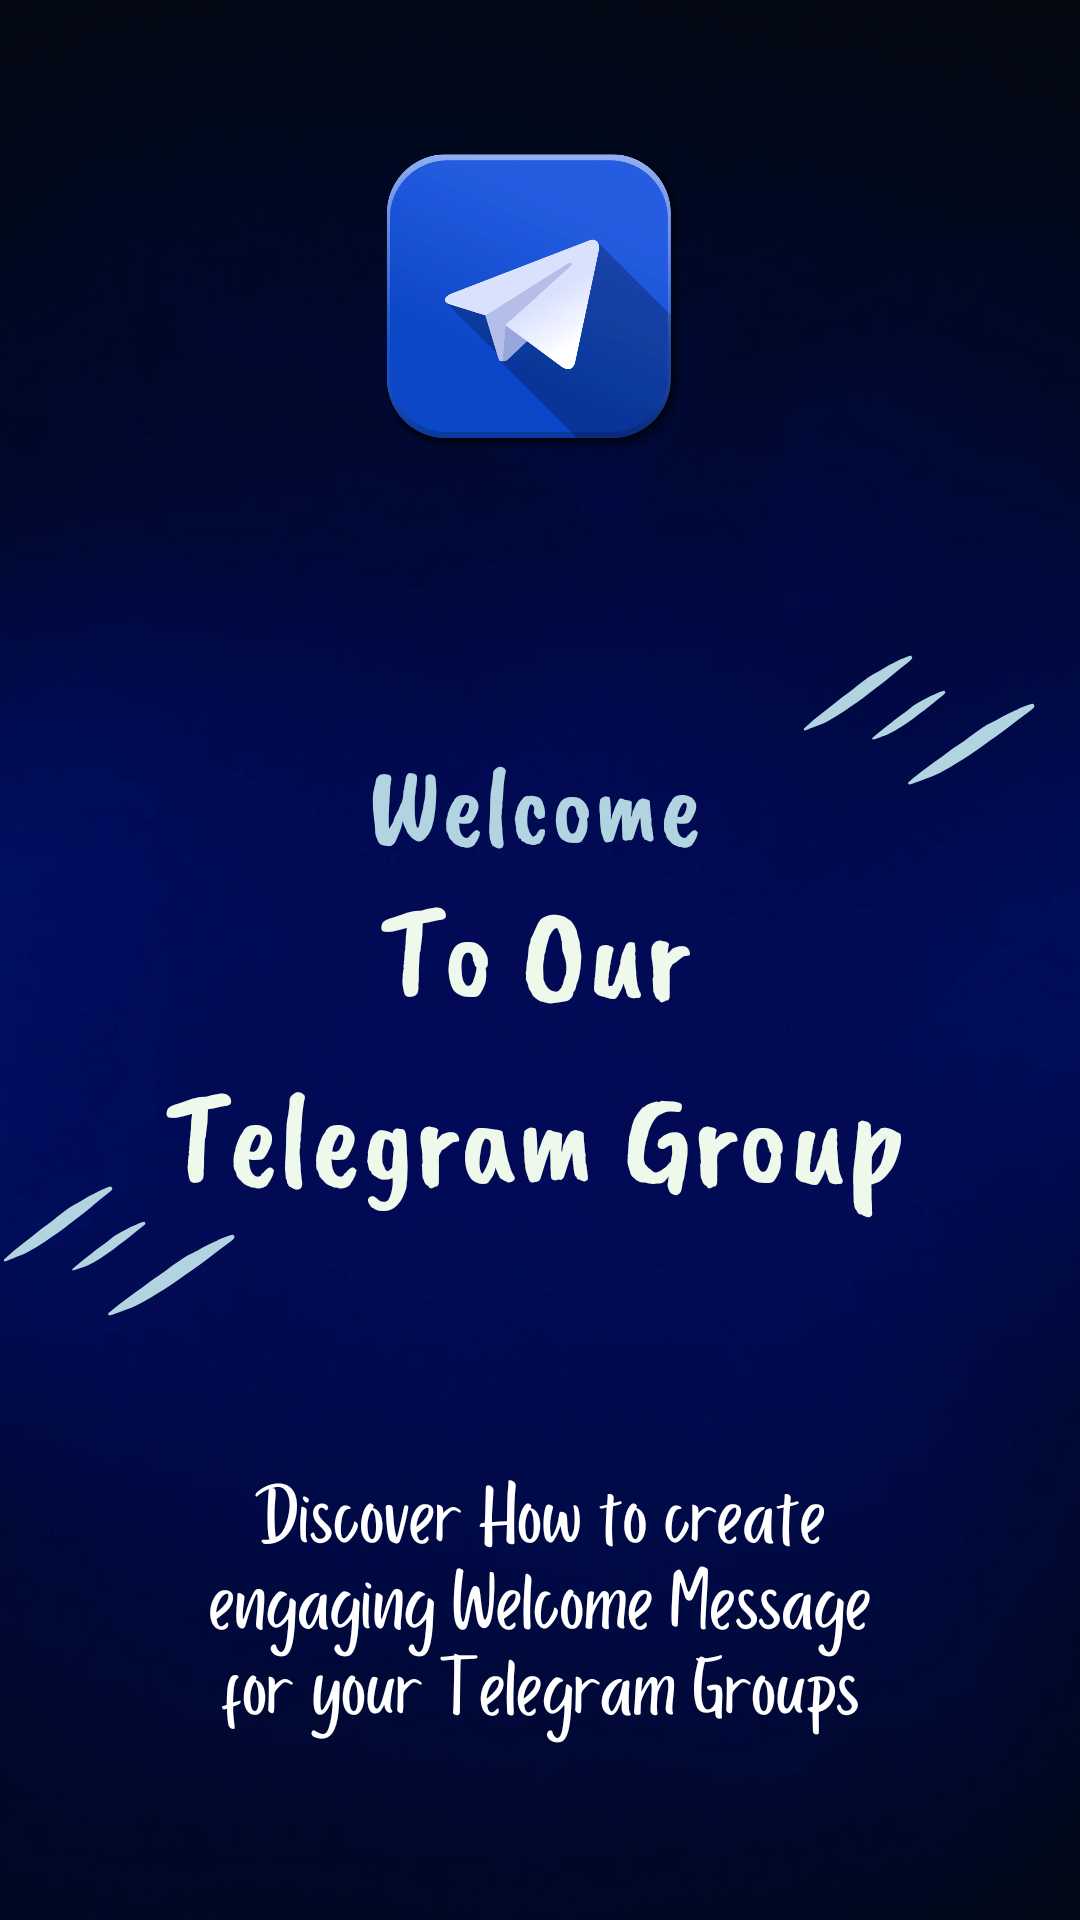 Tips to create a Welcome Message for Telegram Groups